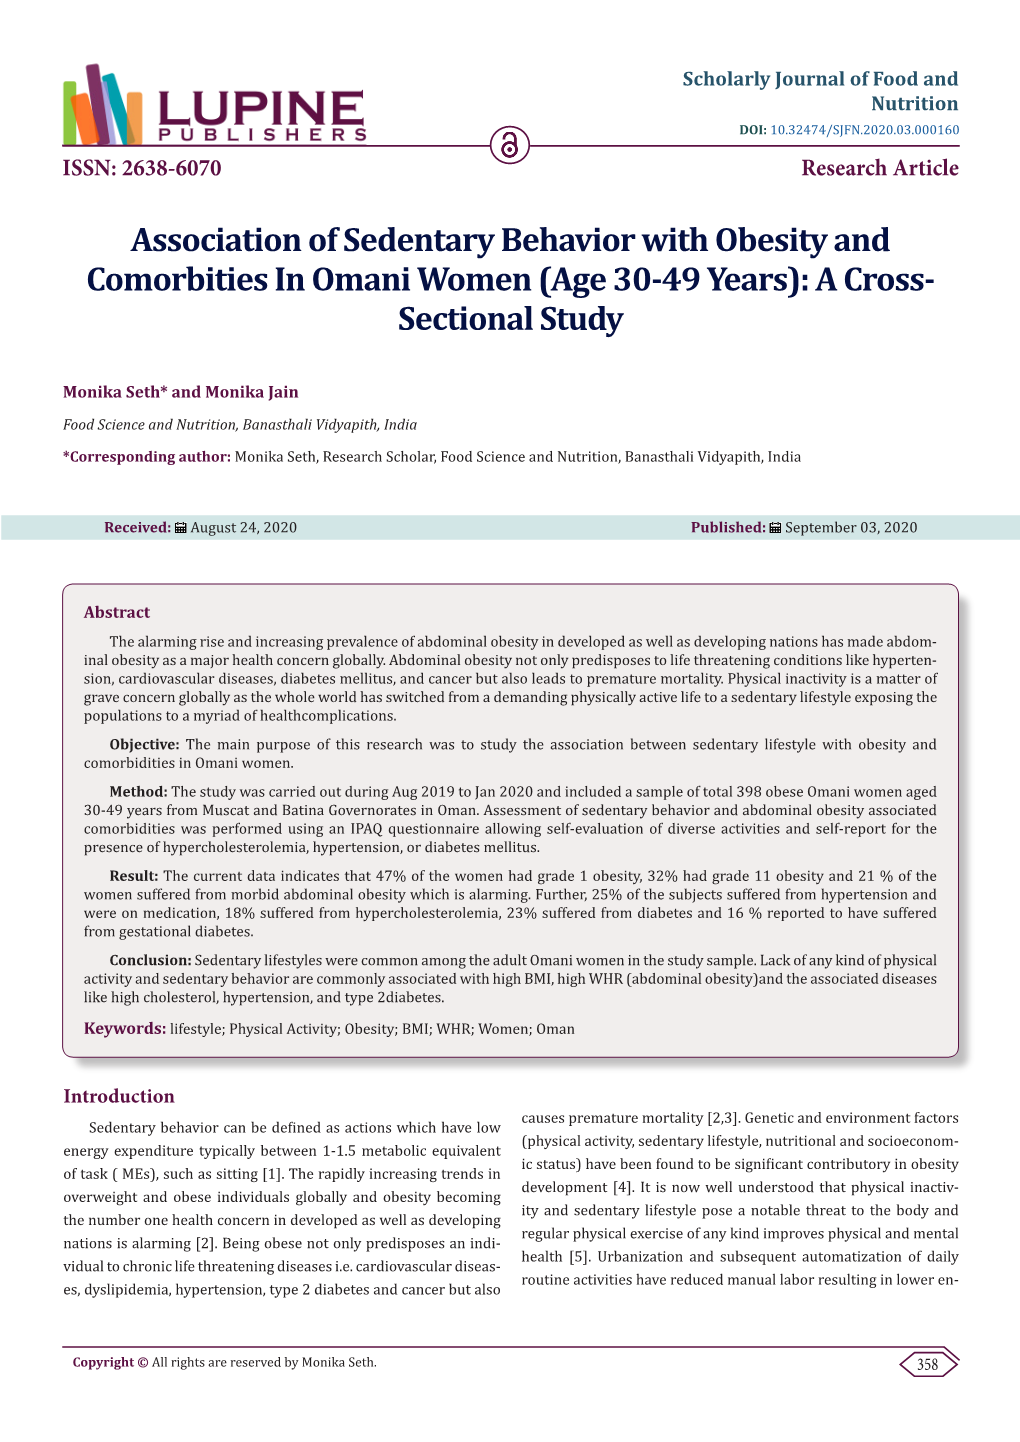 Association of Sedentary Behavior with Obesity and Comorbities in Omani Women (Age 30-49 Years): a Cross- Sectional Study